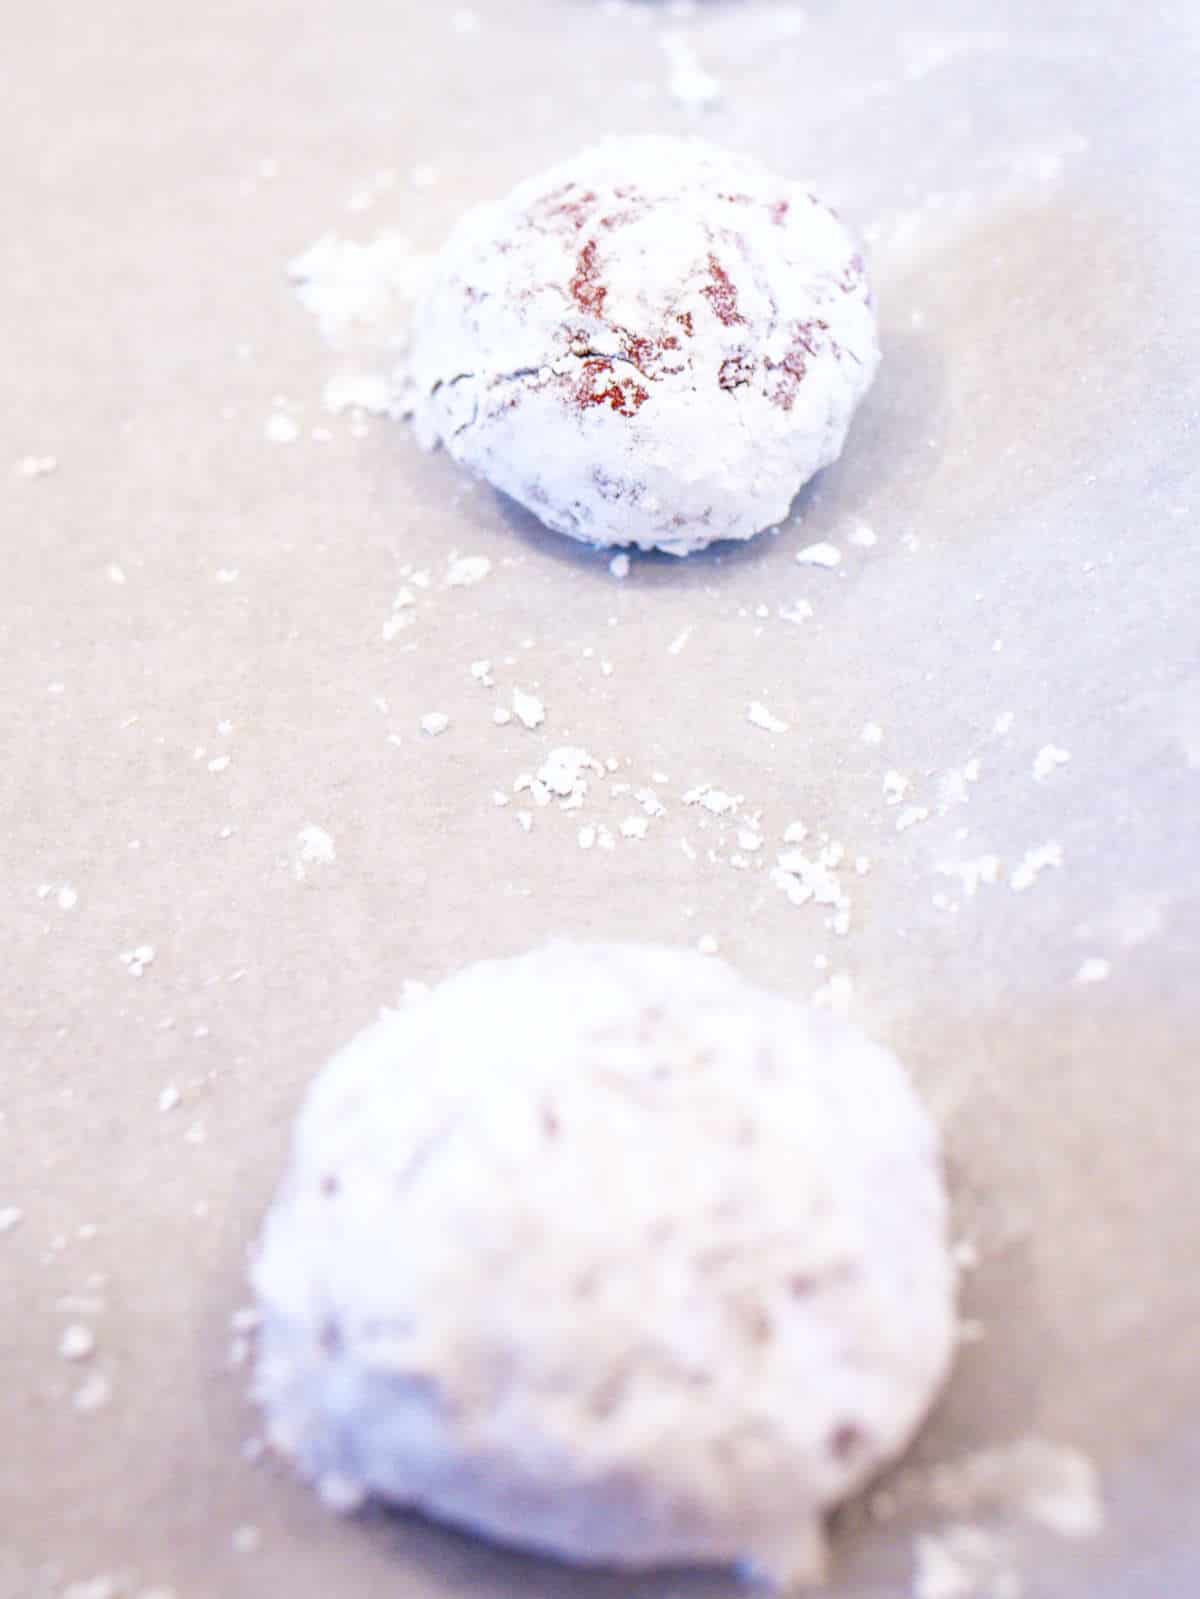 balls of cookie dough rolled in powdered sugar.